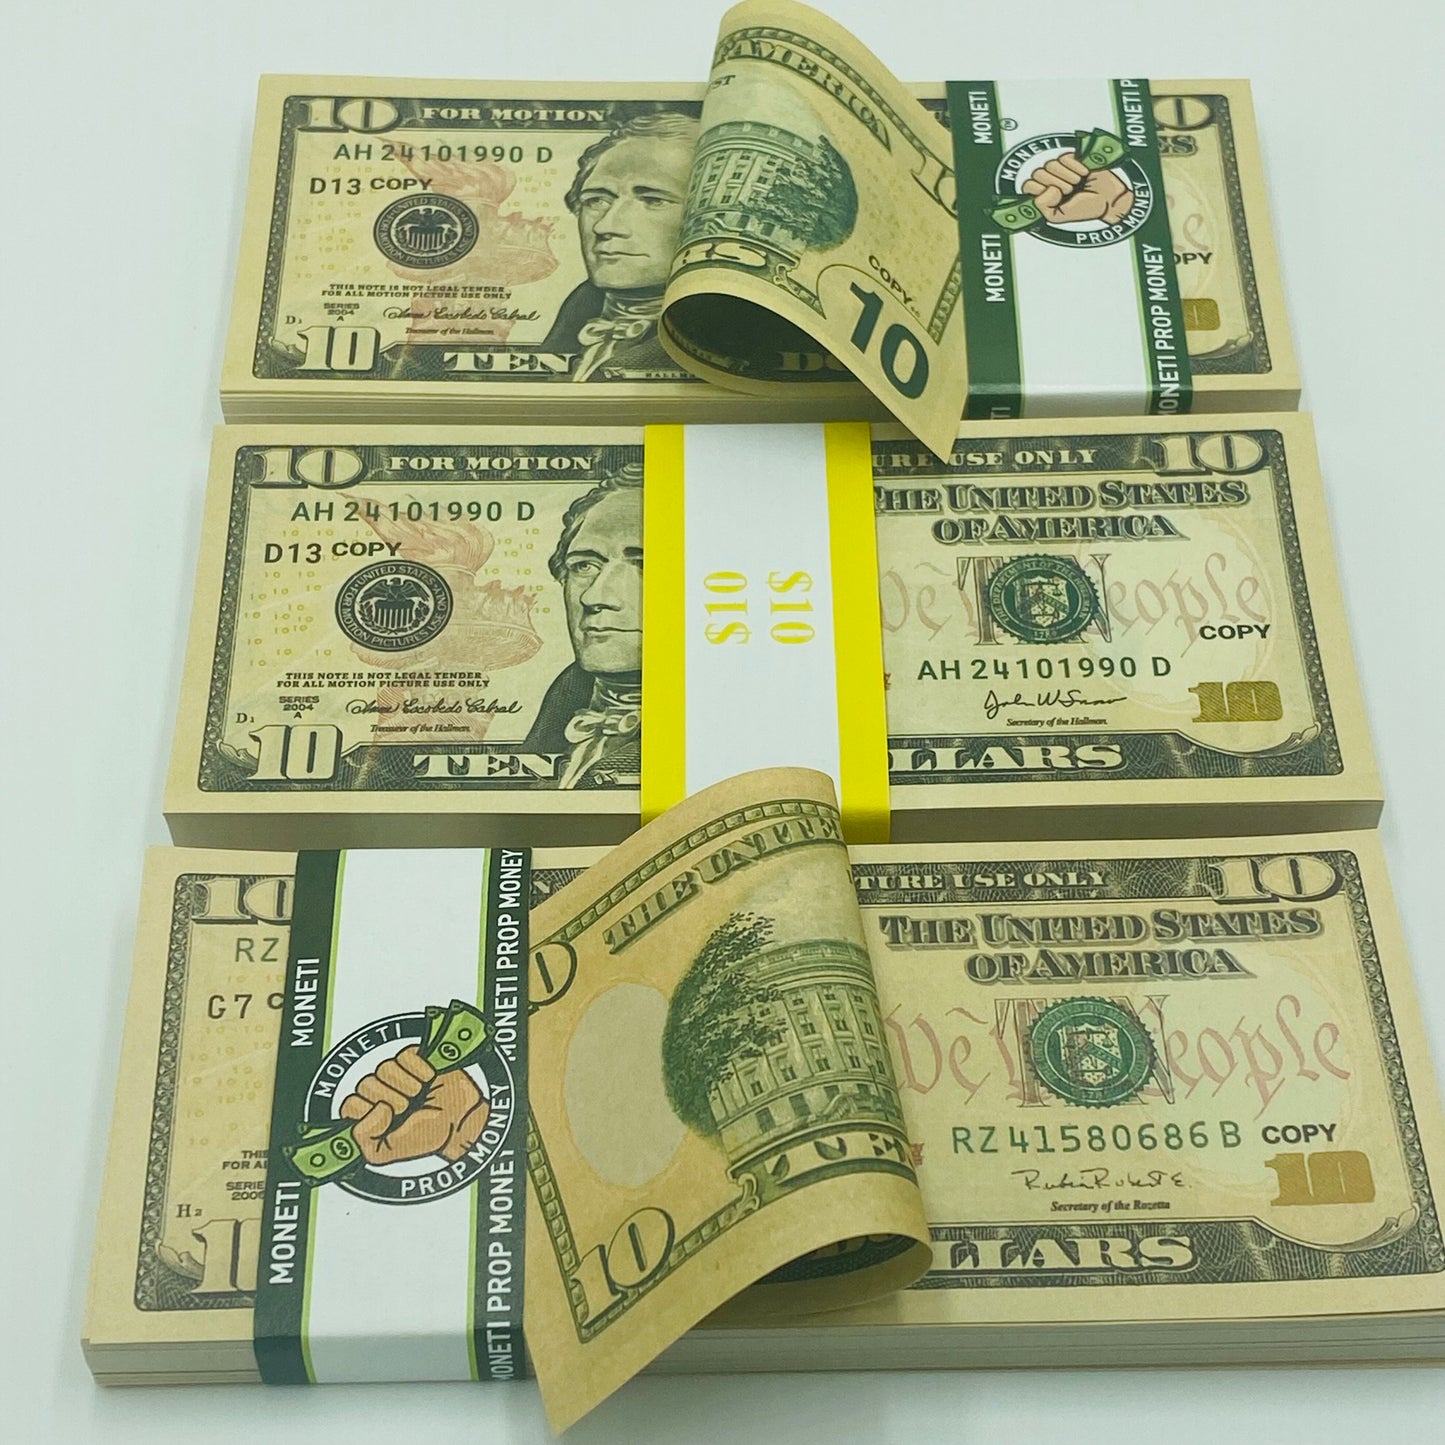 2.000 Dollar $10 Prop Money-Double Sided Full Printed Stack